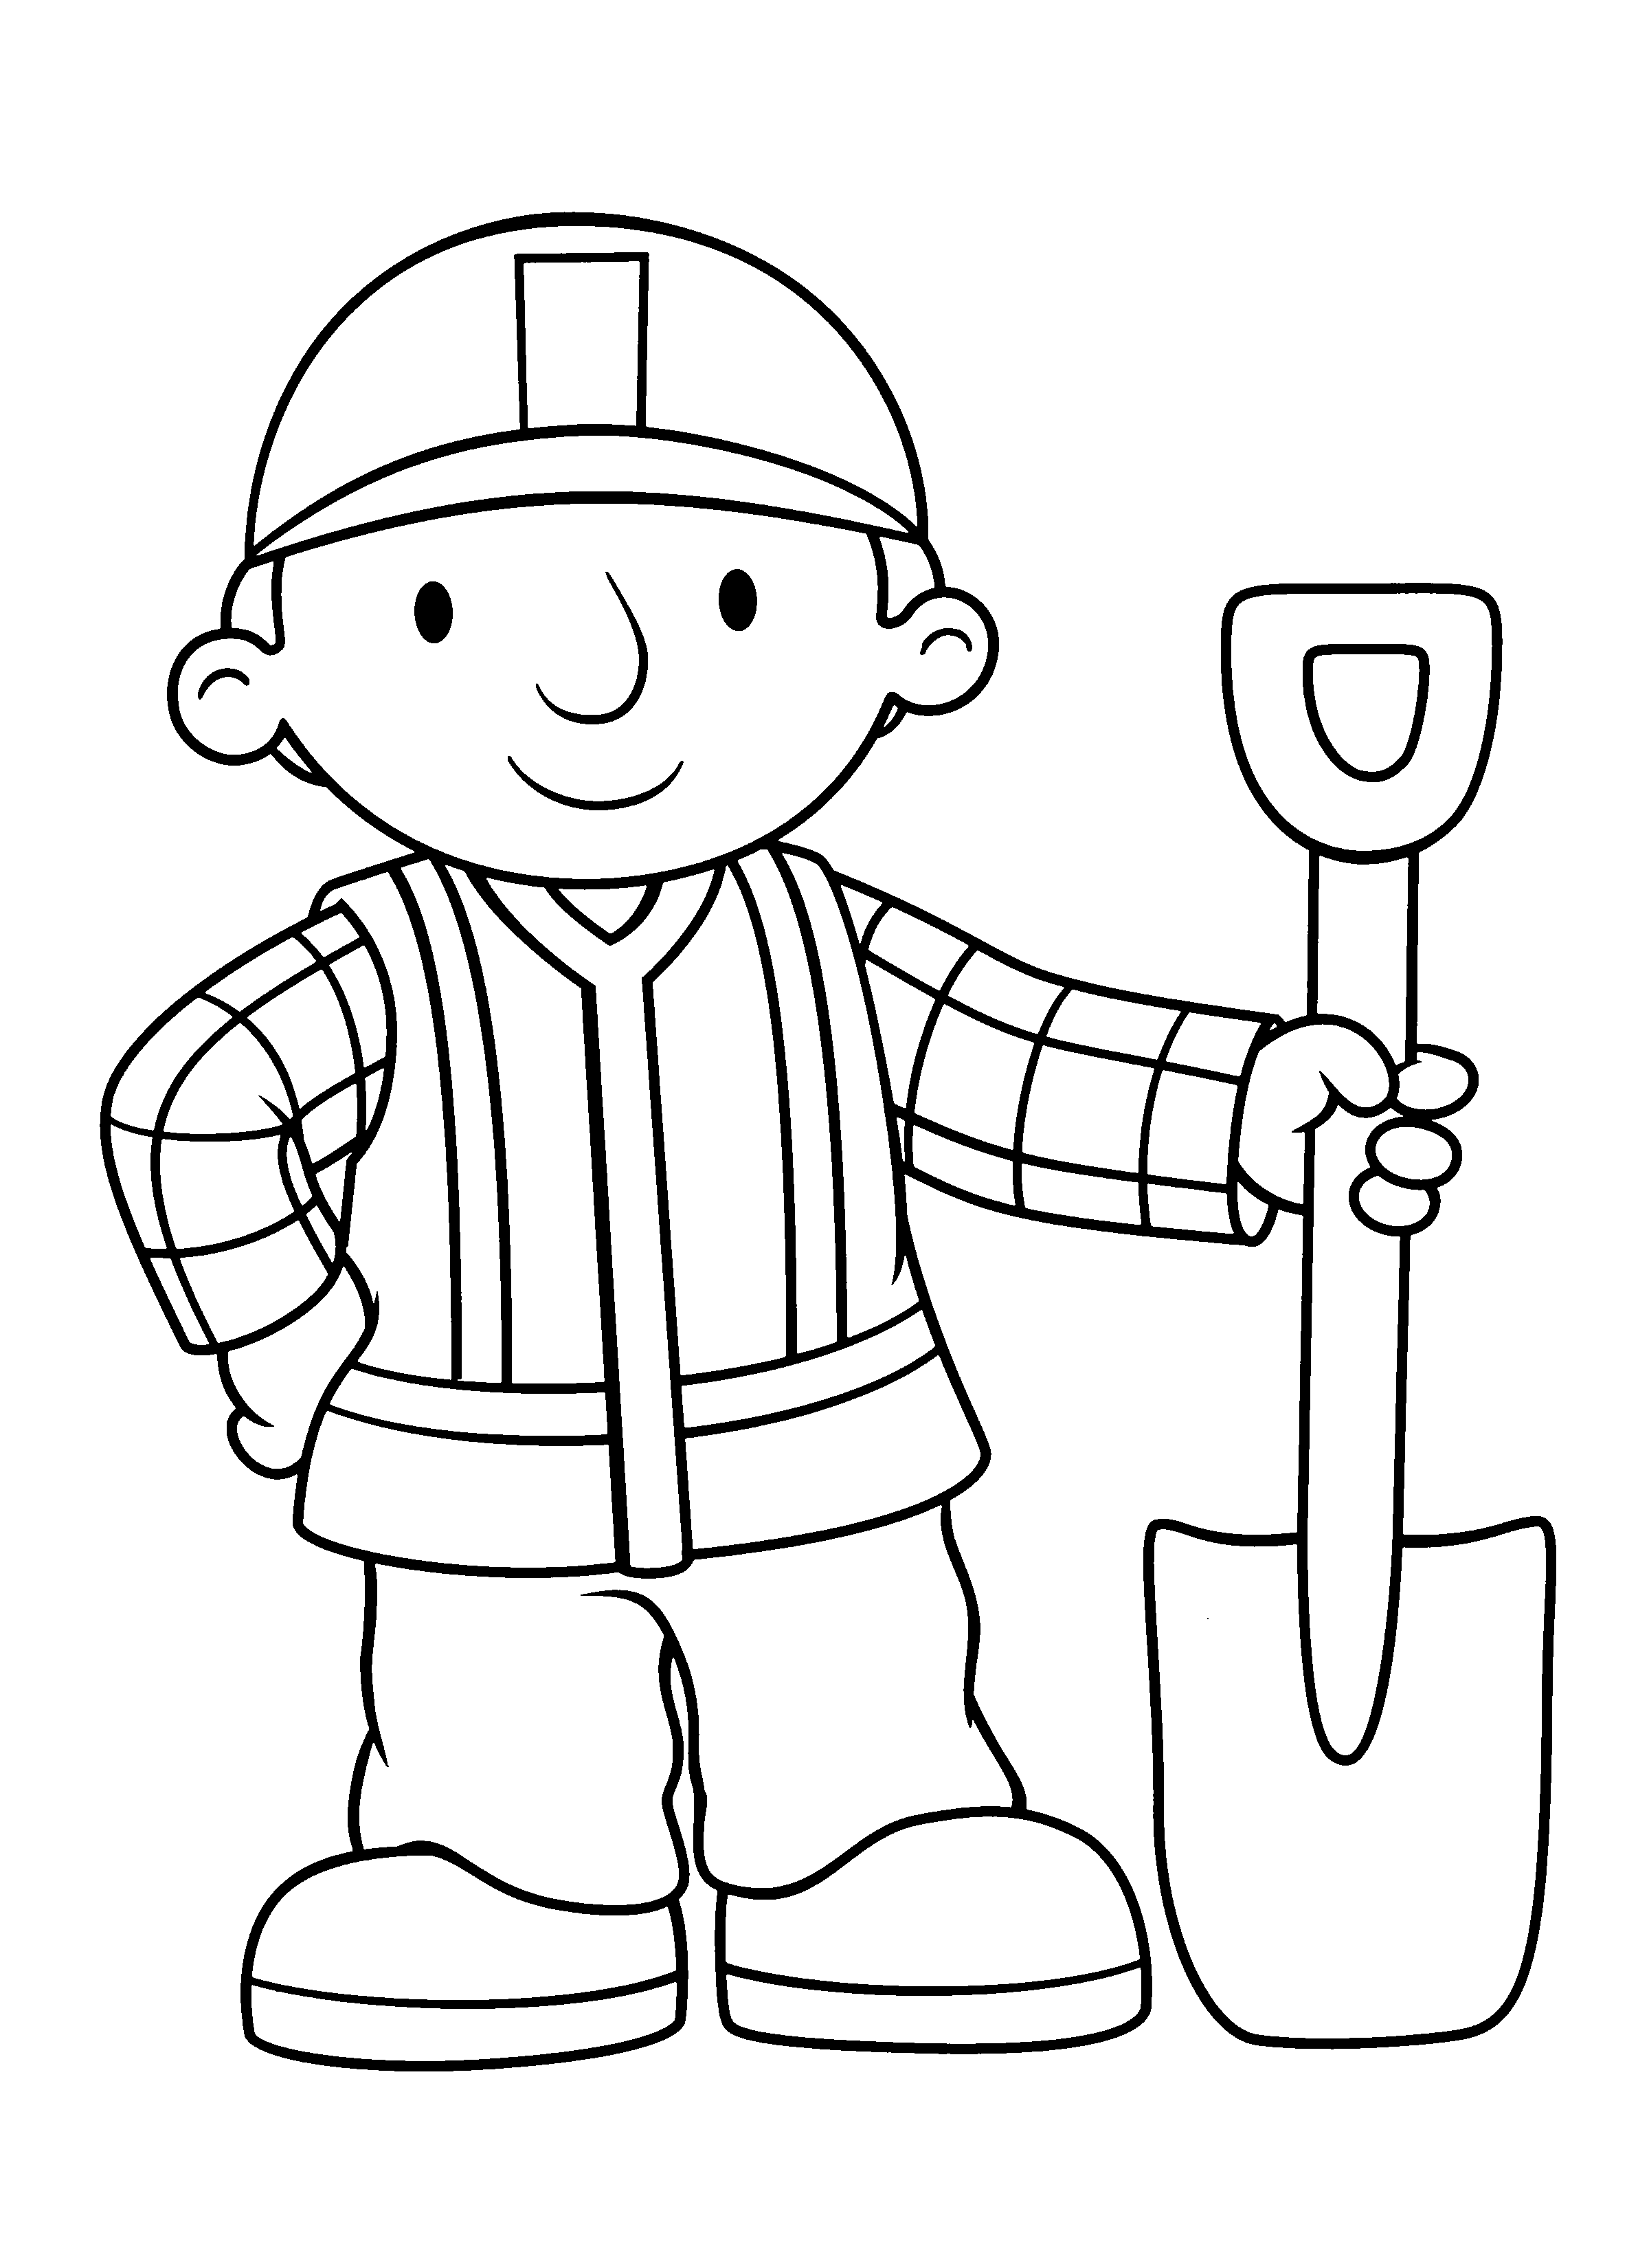 Coloring Page - Bob the builder coloring pages 2